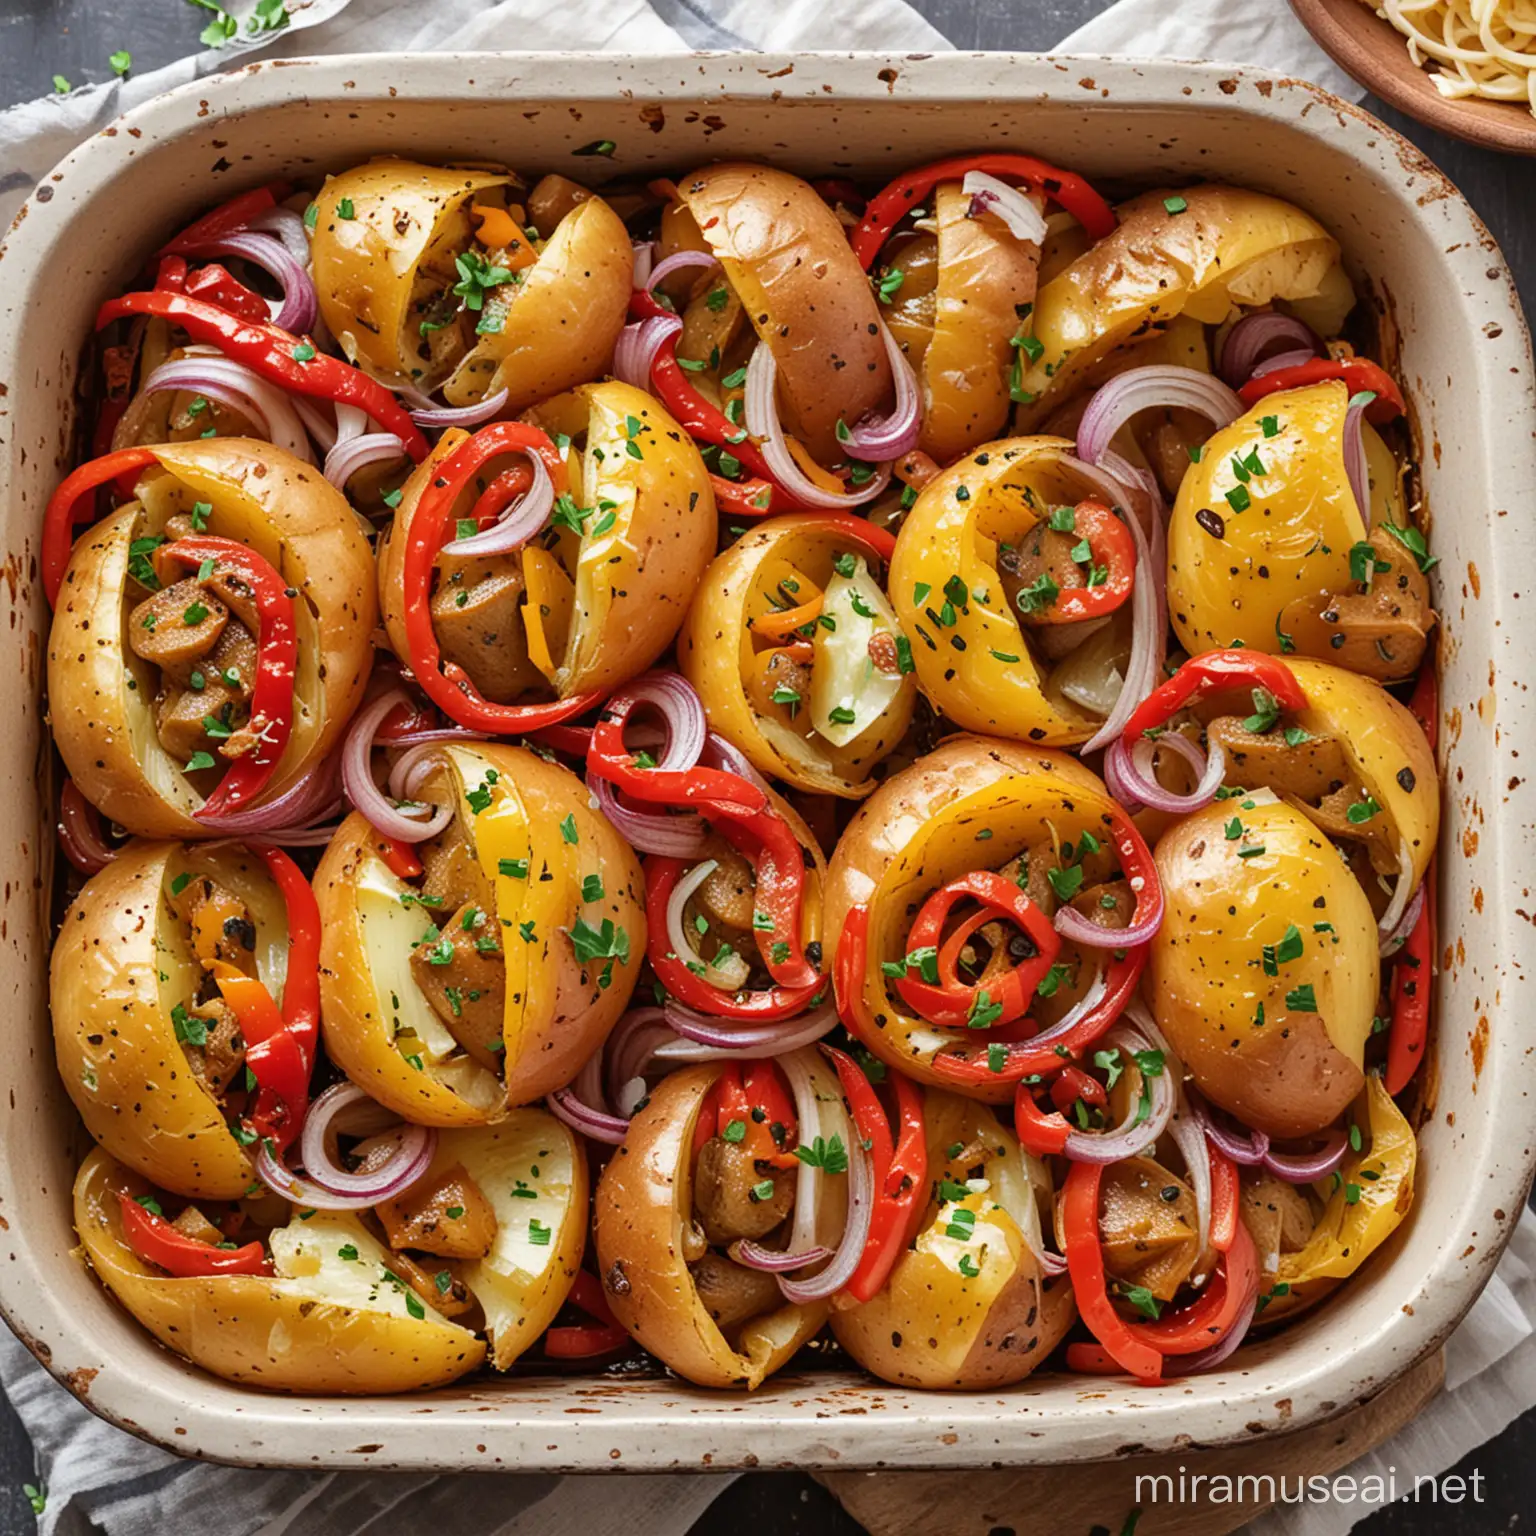 Savory Baked Potatoes with Onion and Peppers Recipe